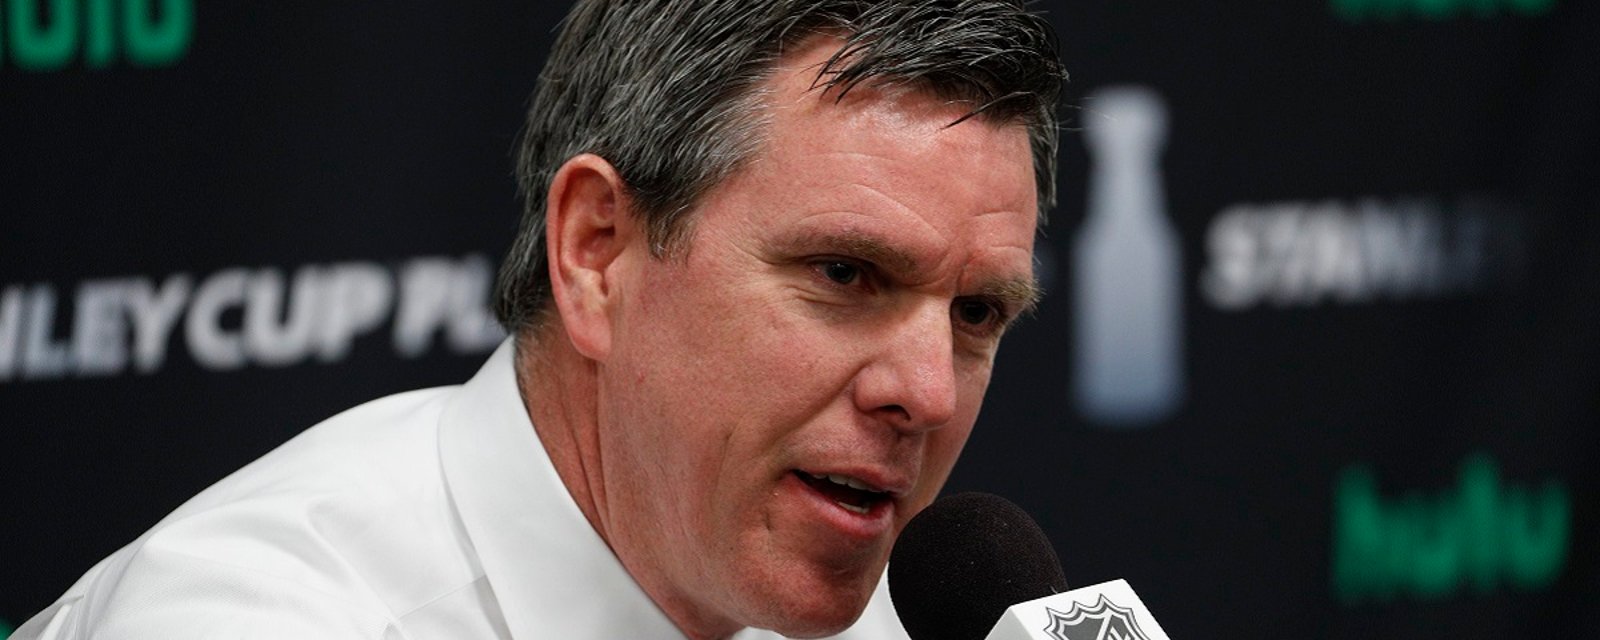 Mike Sullivan sends a message to his team after ugly deadline.